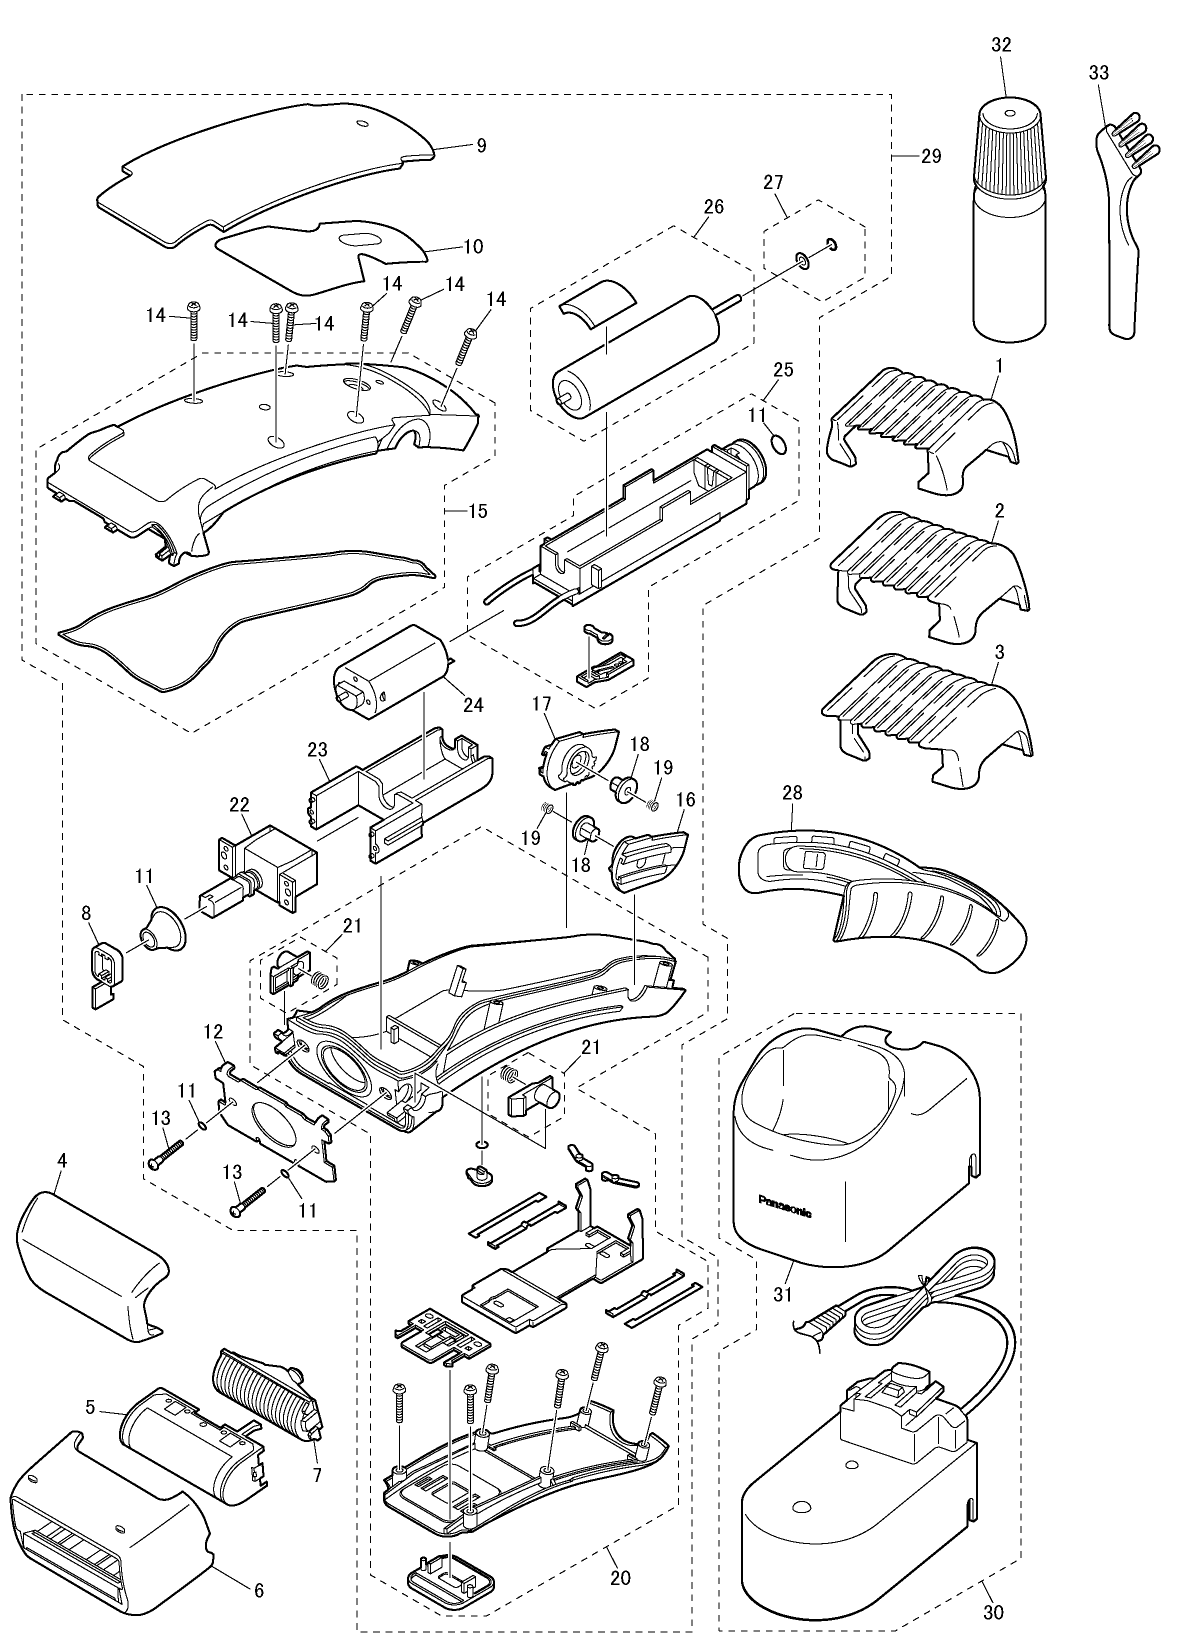 ER-GY30: Exploded View